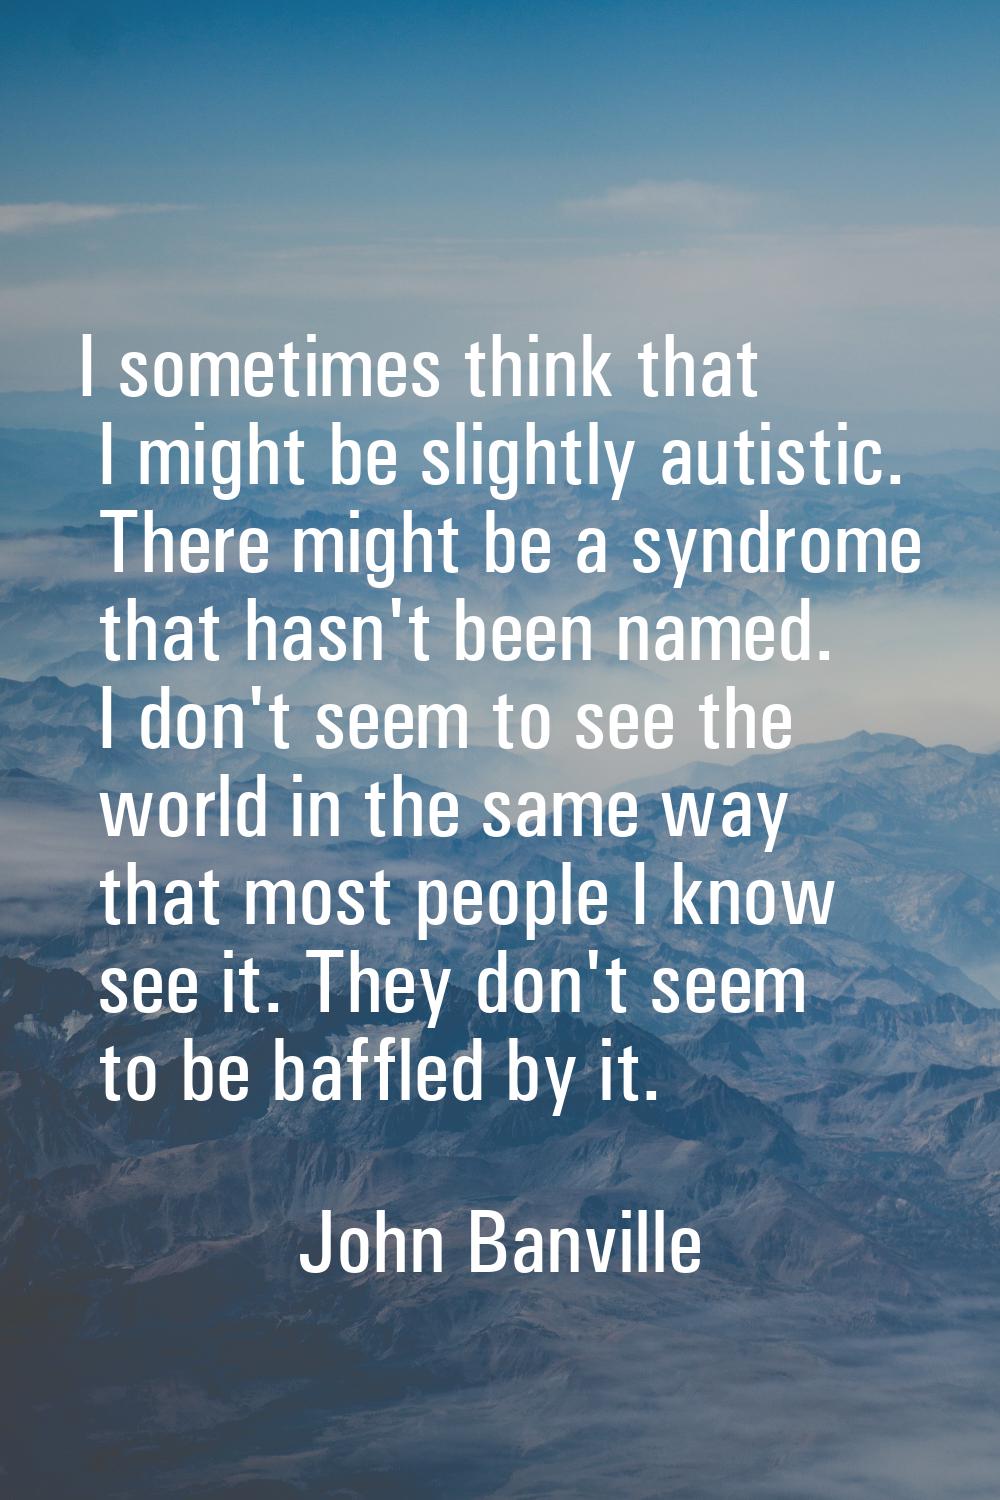 I sometimes think that I might be slightly autistic. There might be a syndrome that hasn't been nam